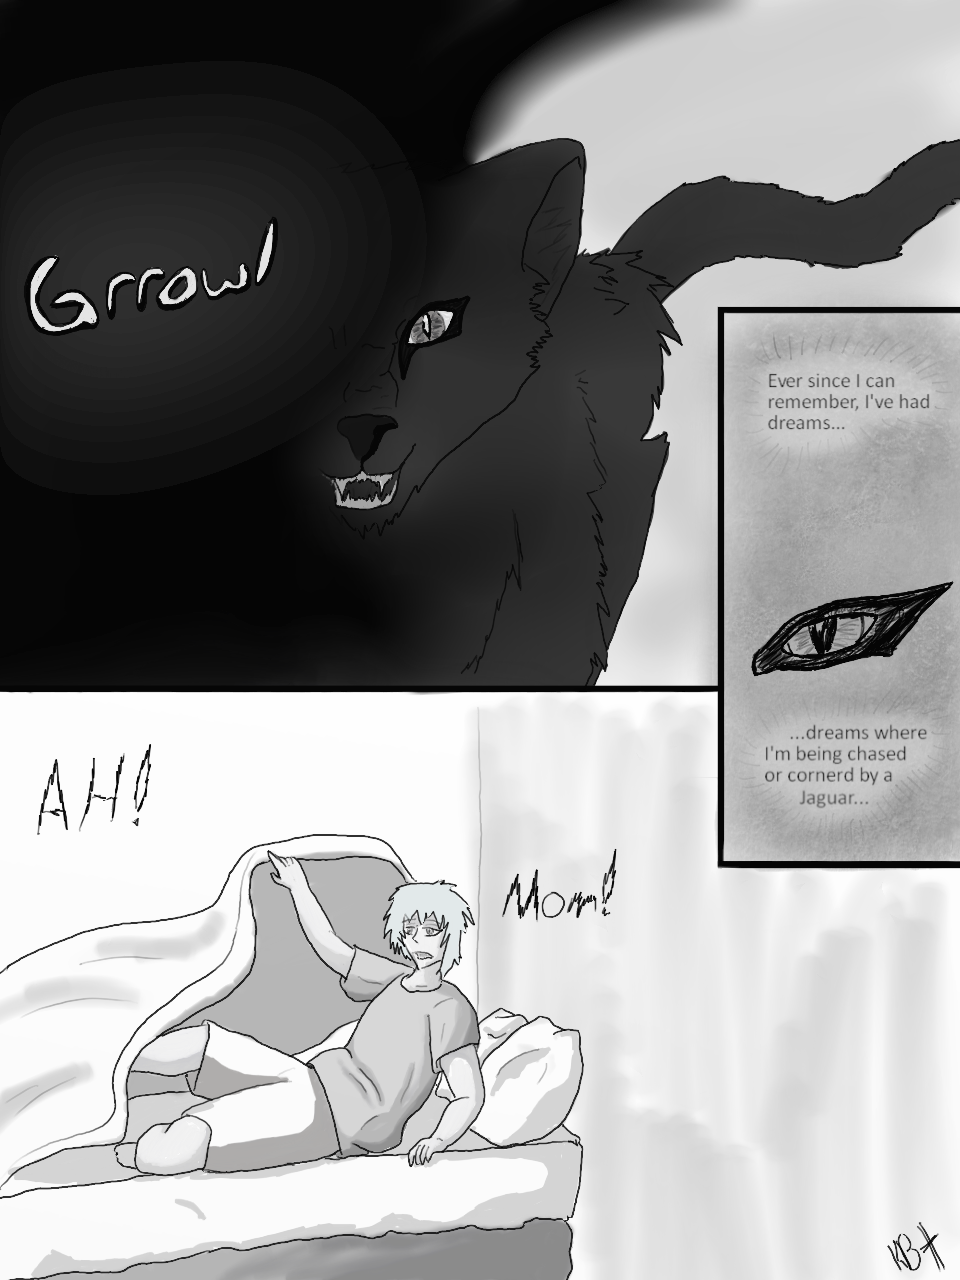 Spirit of the animals page 1 by Wishsayer